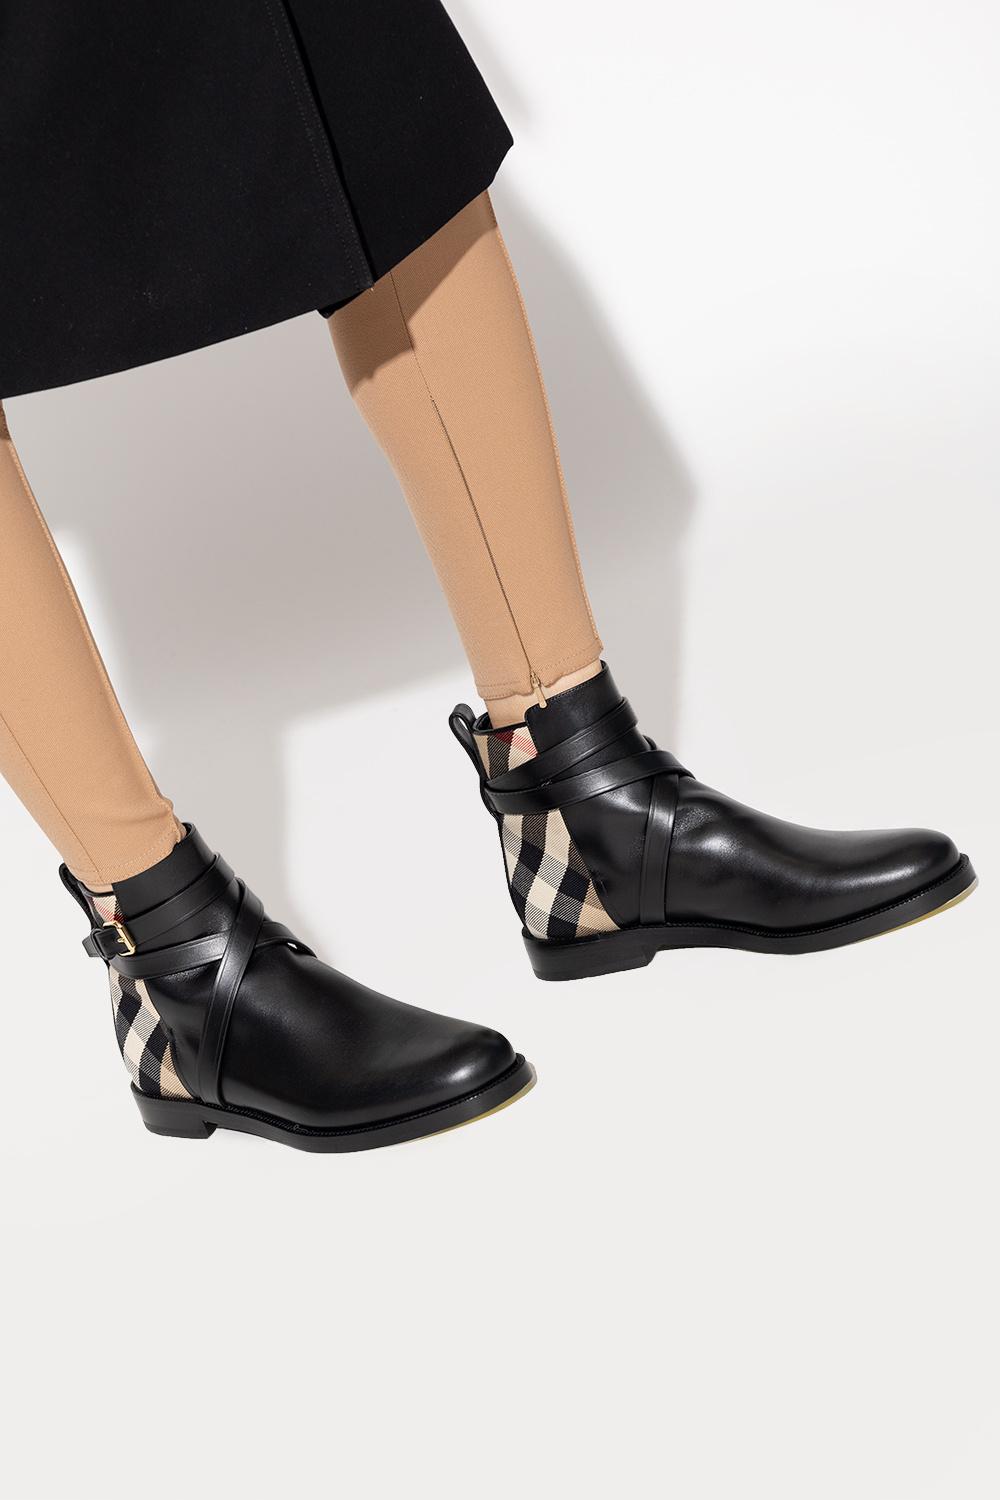 Burberry 'new Pryle' Ankle Boots in Black | Lyst